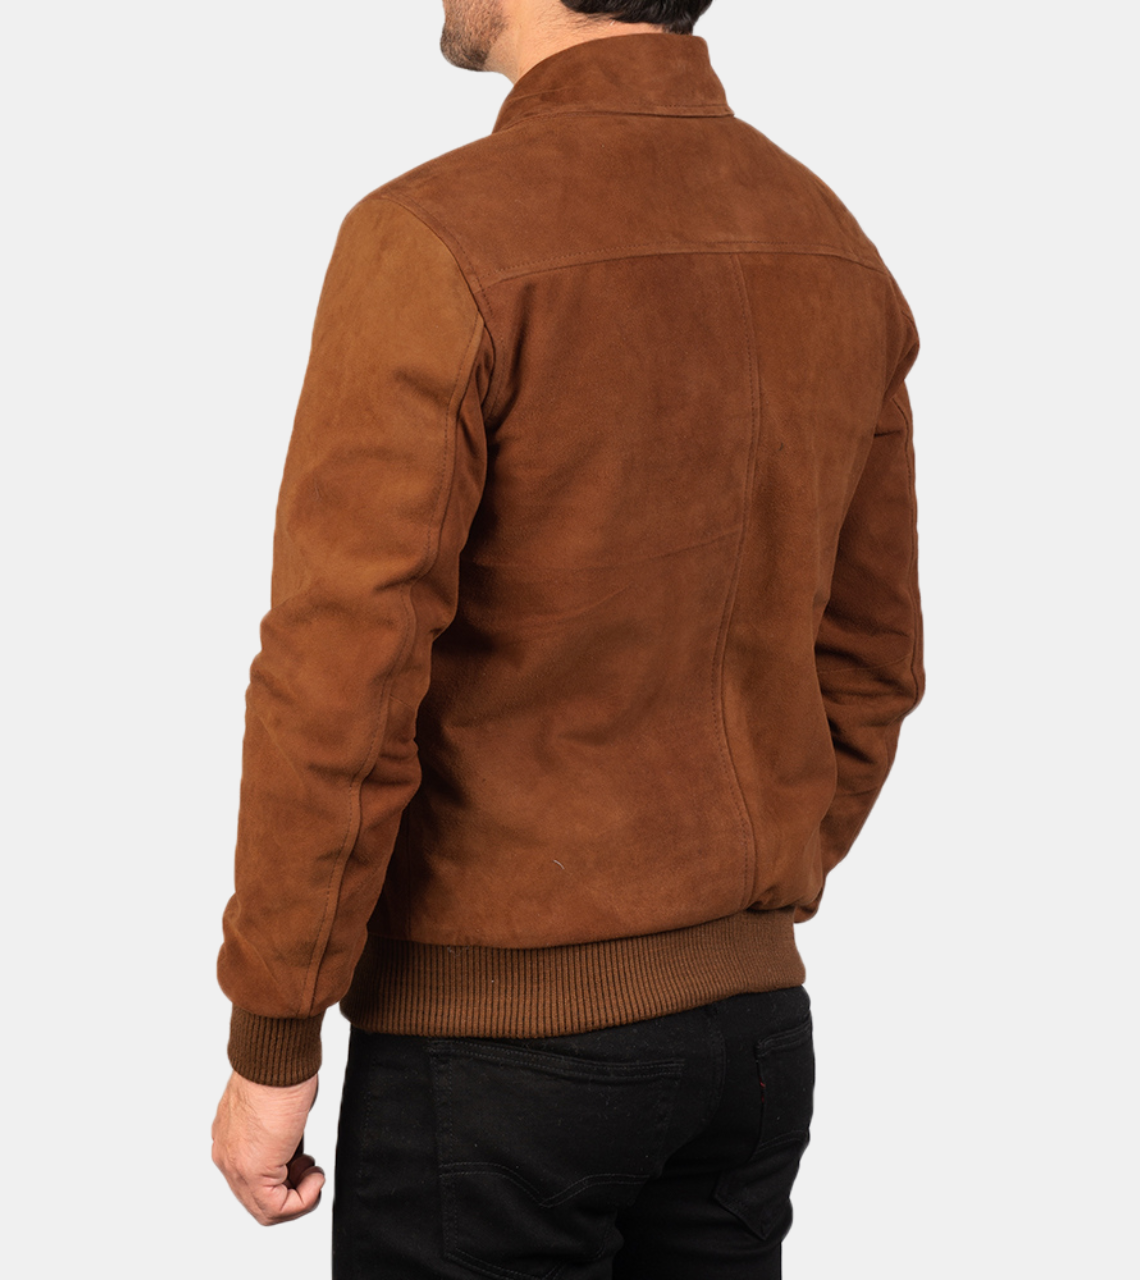  Bronze Suede Leather Jacket For Men's